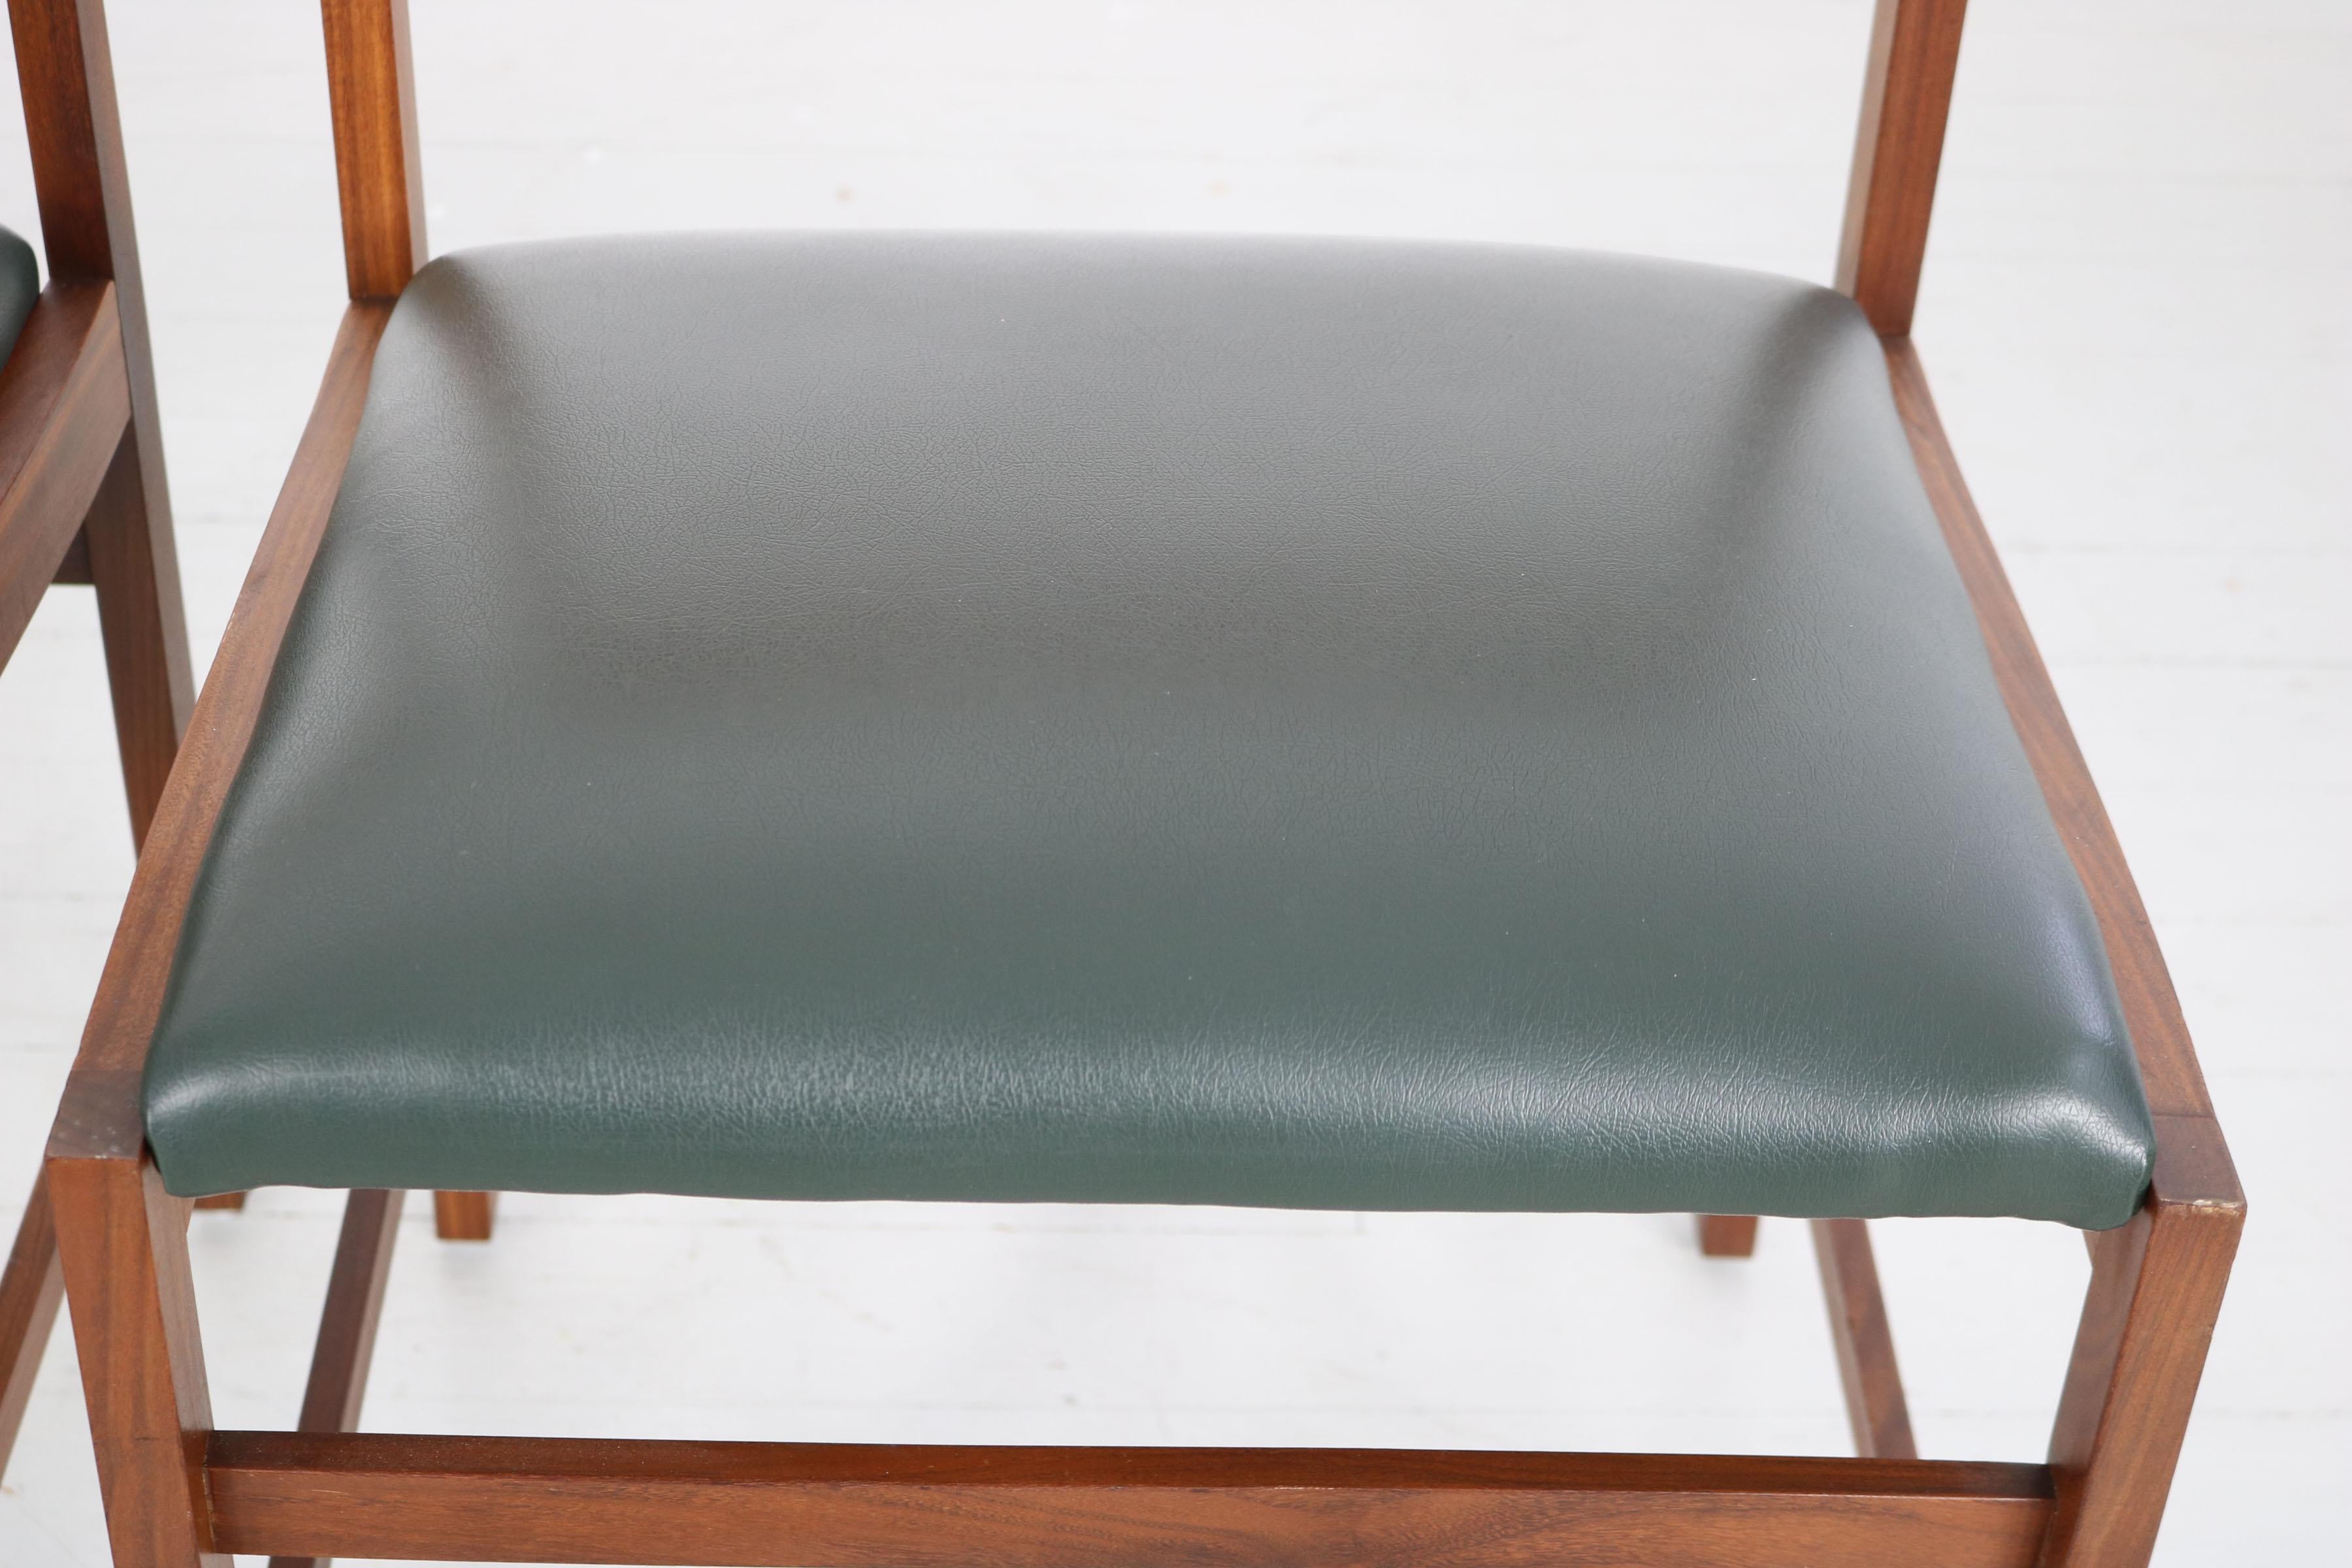 Set of 3 Solid Wooden Chairs with Dark Green Leatherette Upholstery, 1960s For Sale 8